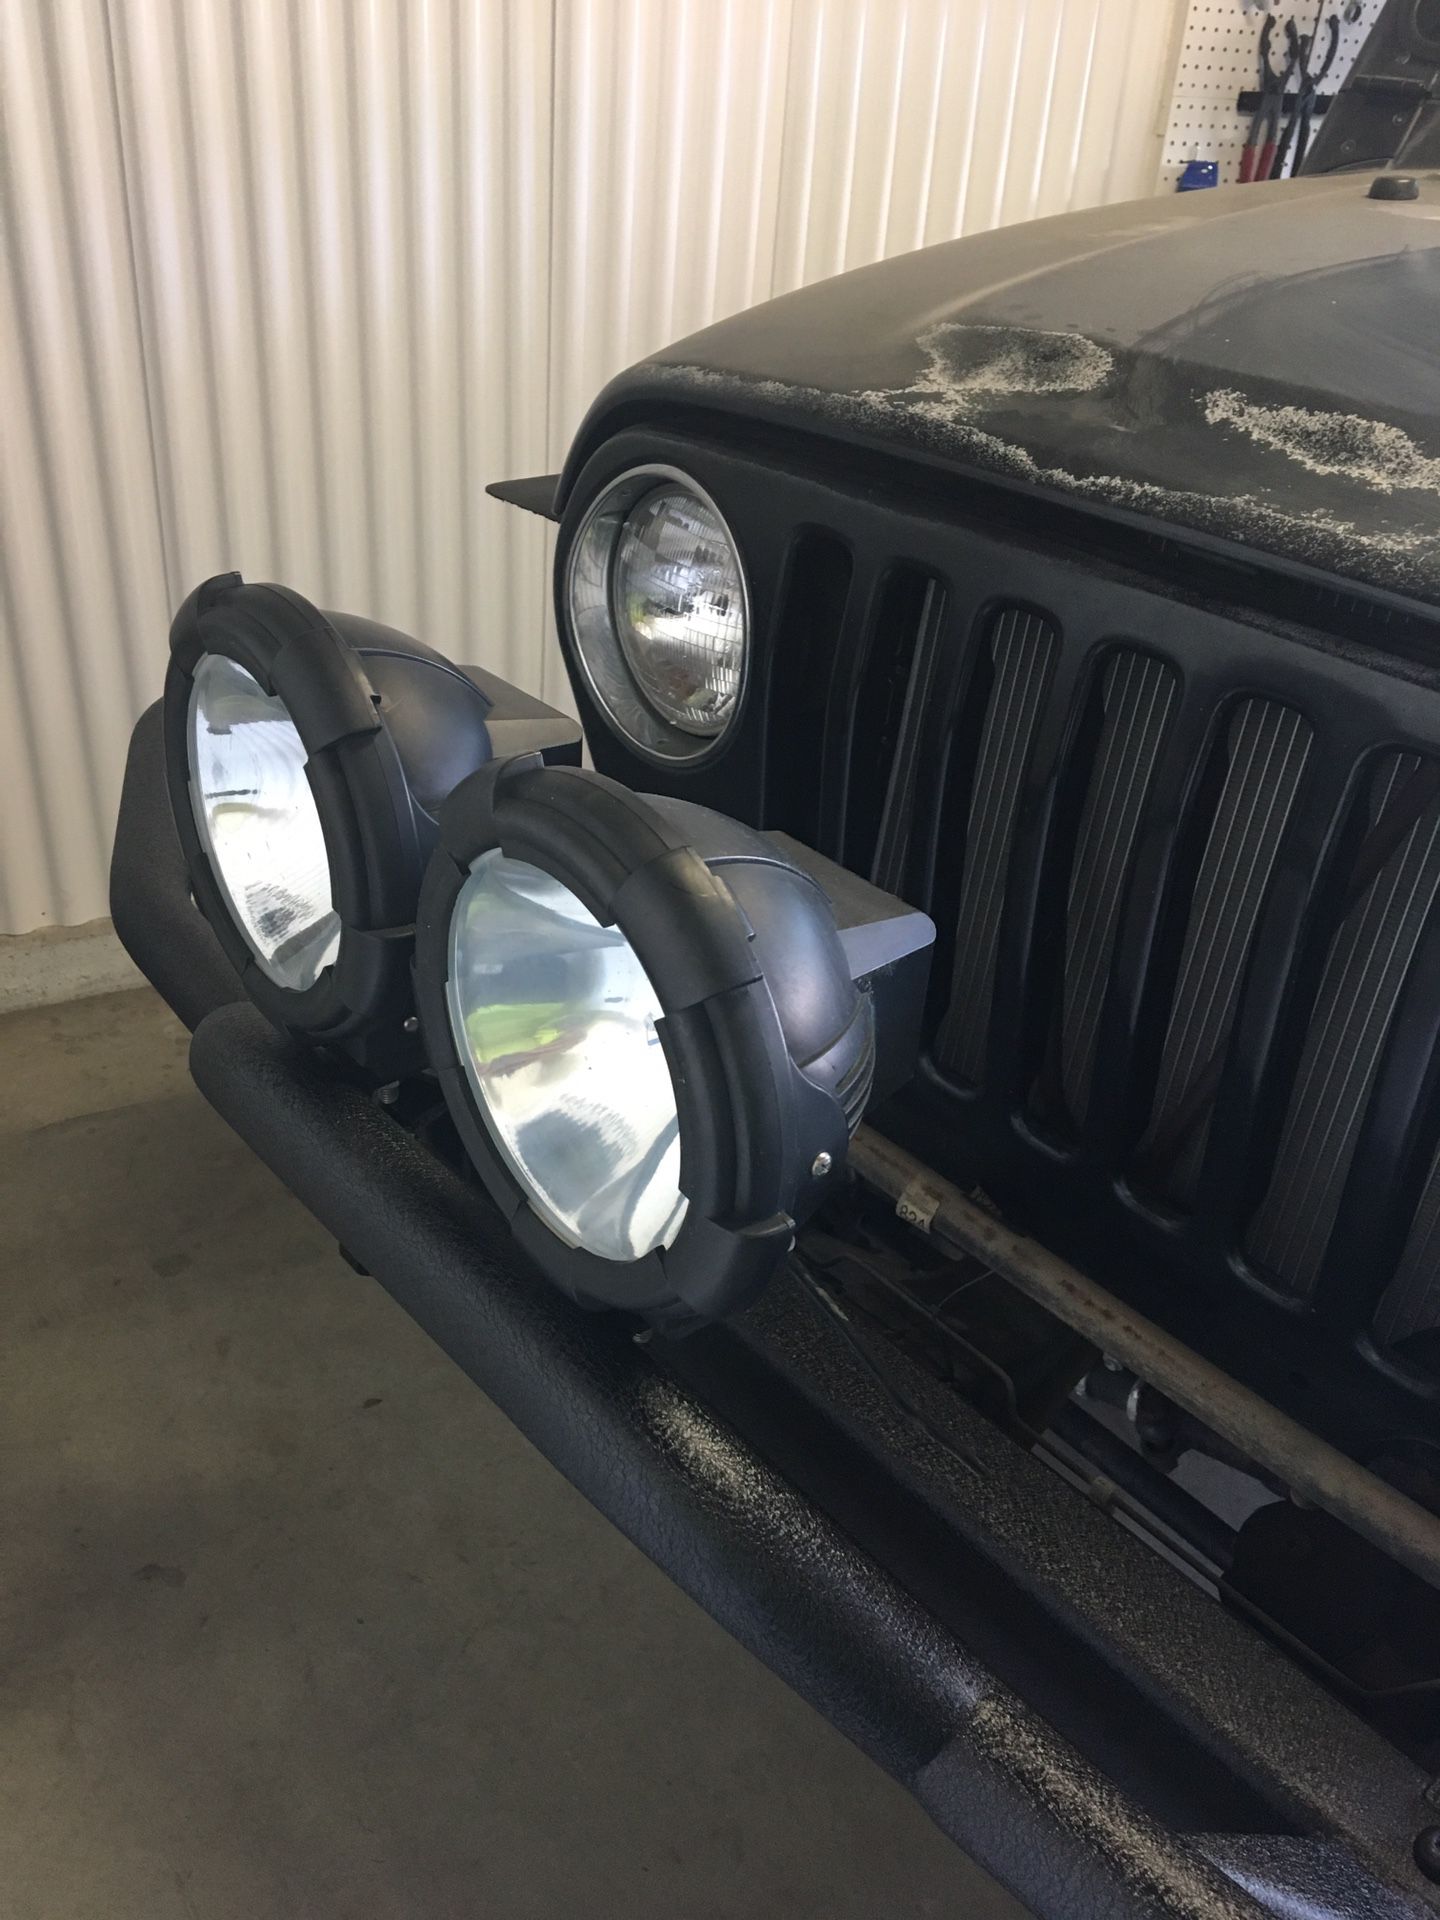 HID Offroad Lights